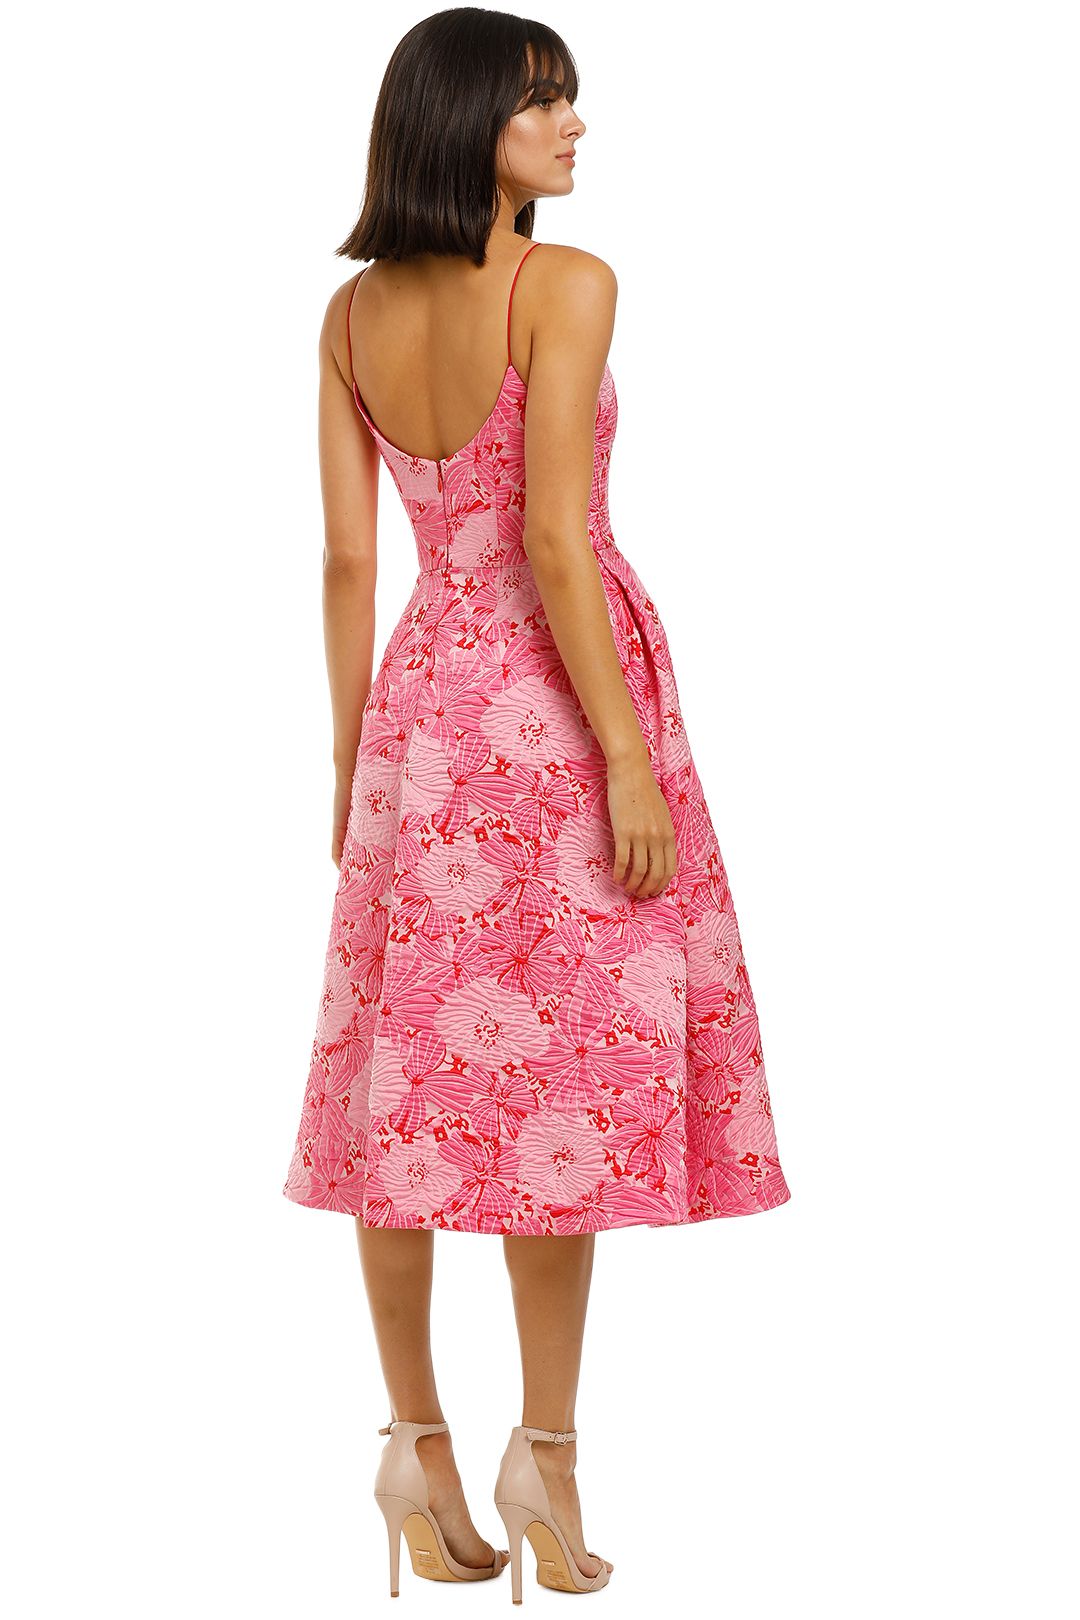 Love-Honor-Alexia-Midi-Pink-Floral-Back